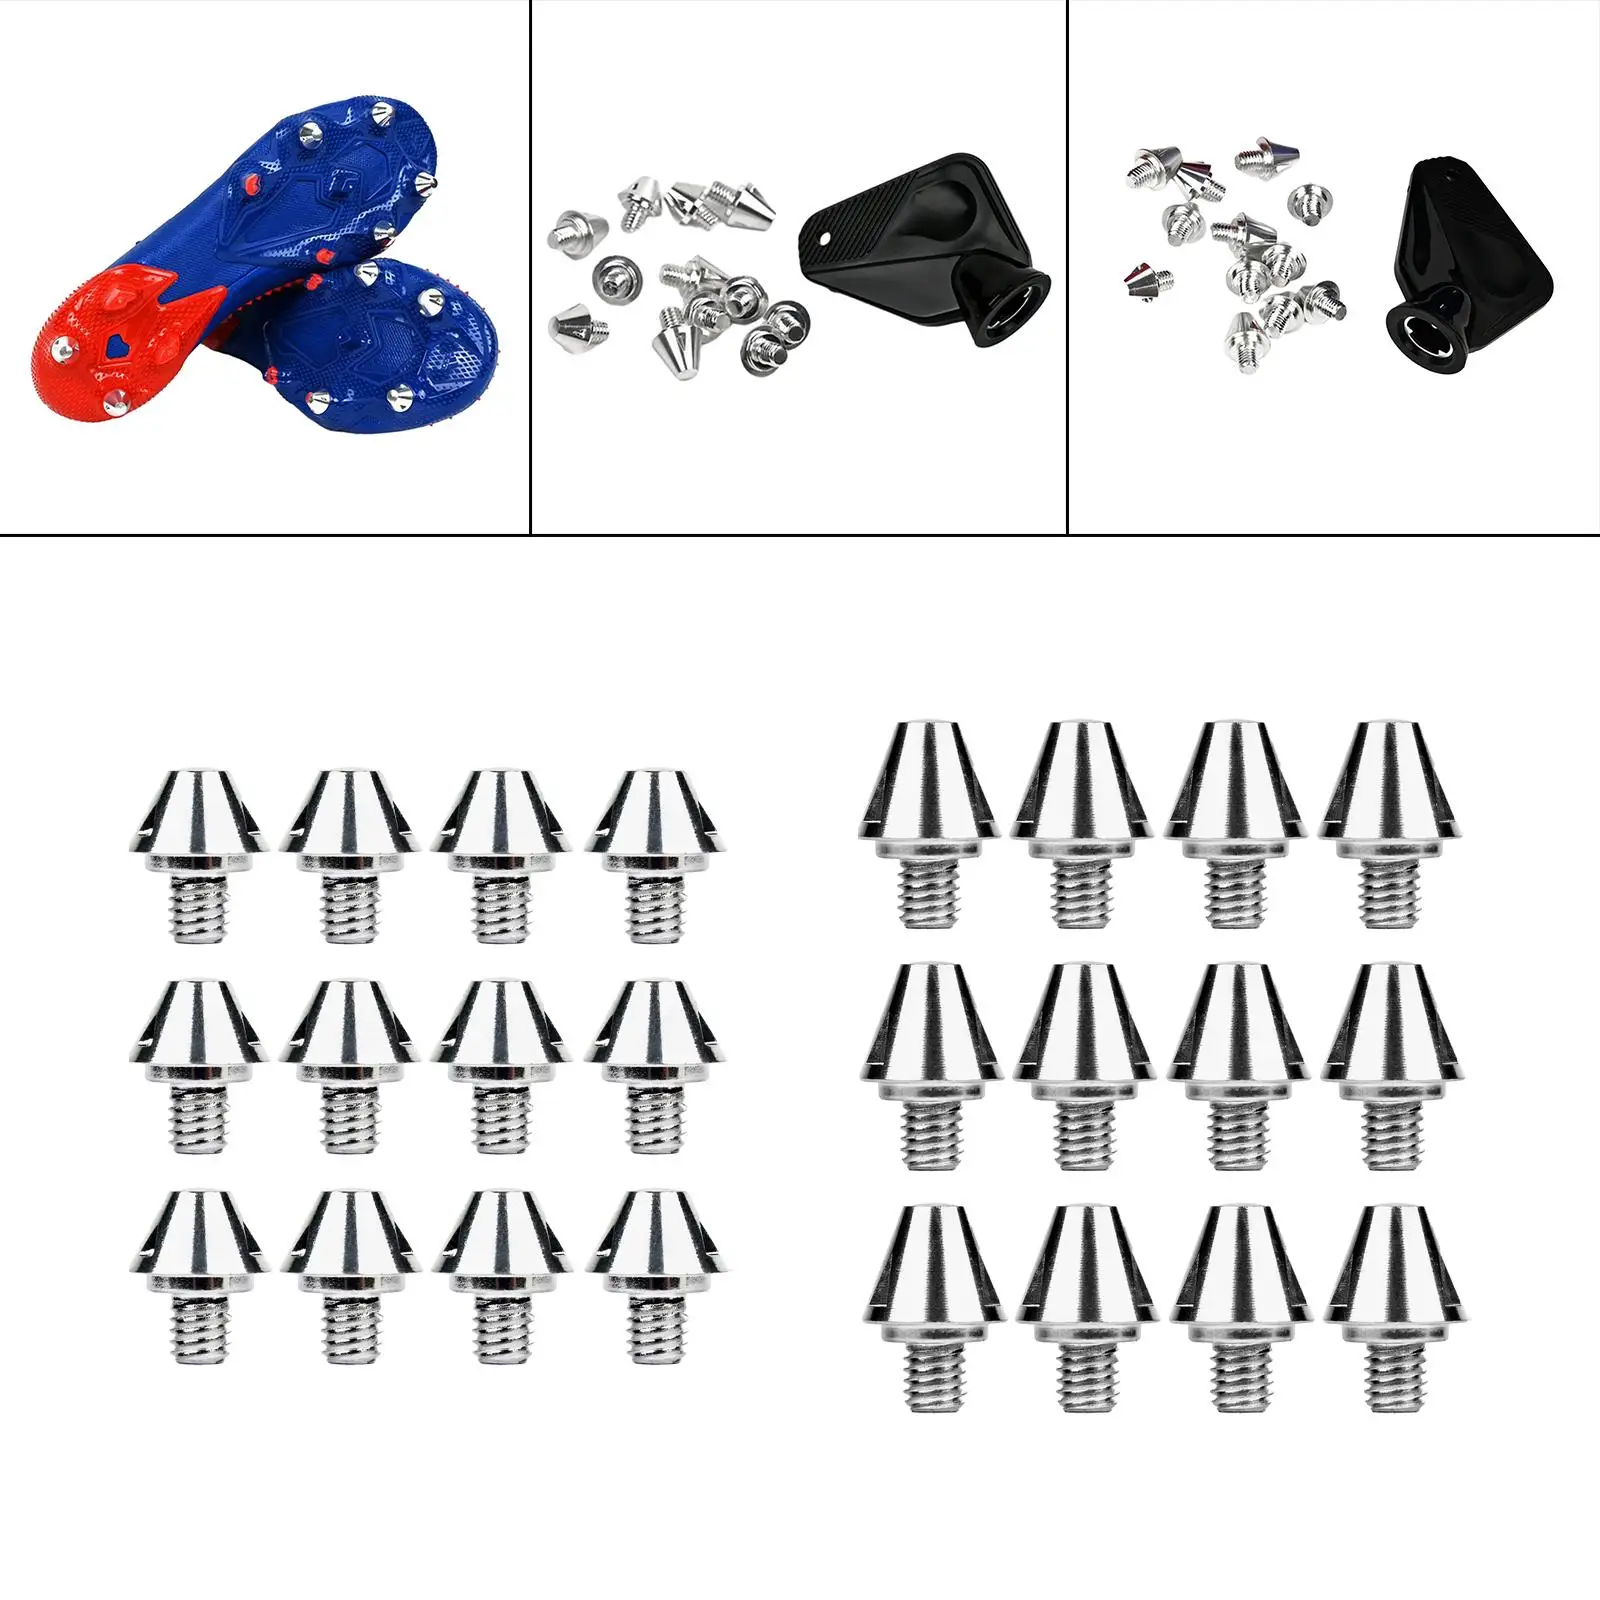 12x Soccer Shoe Spikes Comfortable Screw in Strength Aluminum Football Boot Studs for Indoor Outdoor Sports Competition Training